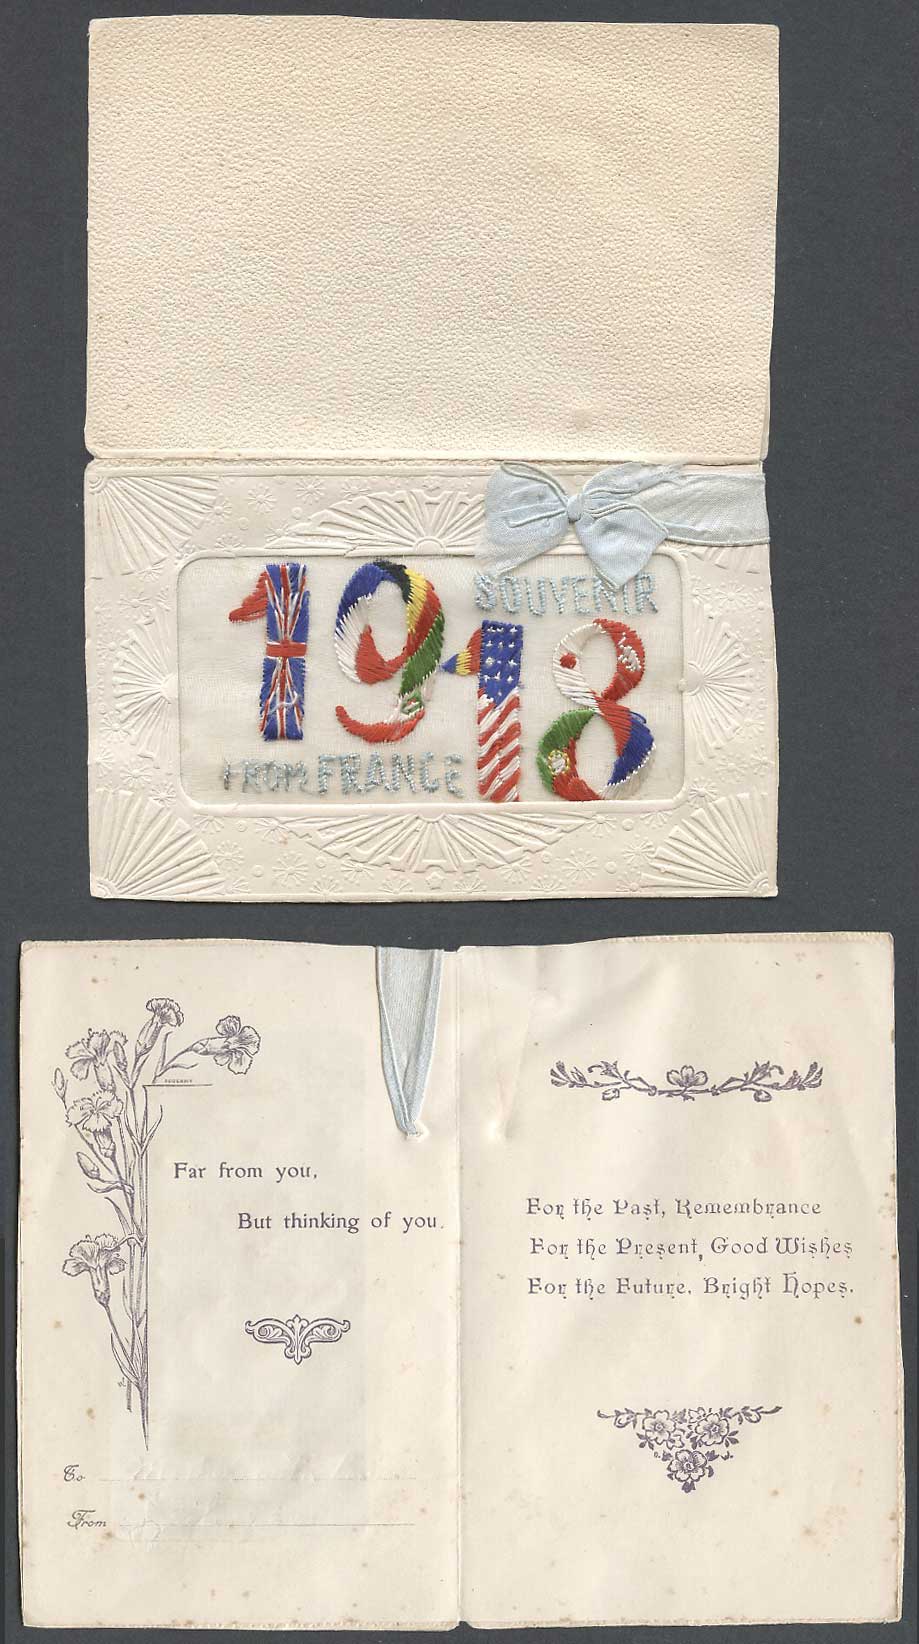 WW1 SILK Embroidered Souvenir from France Flags 1918 Old Greeting Card Blue Knot